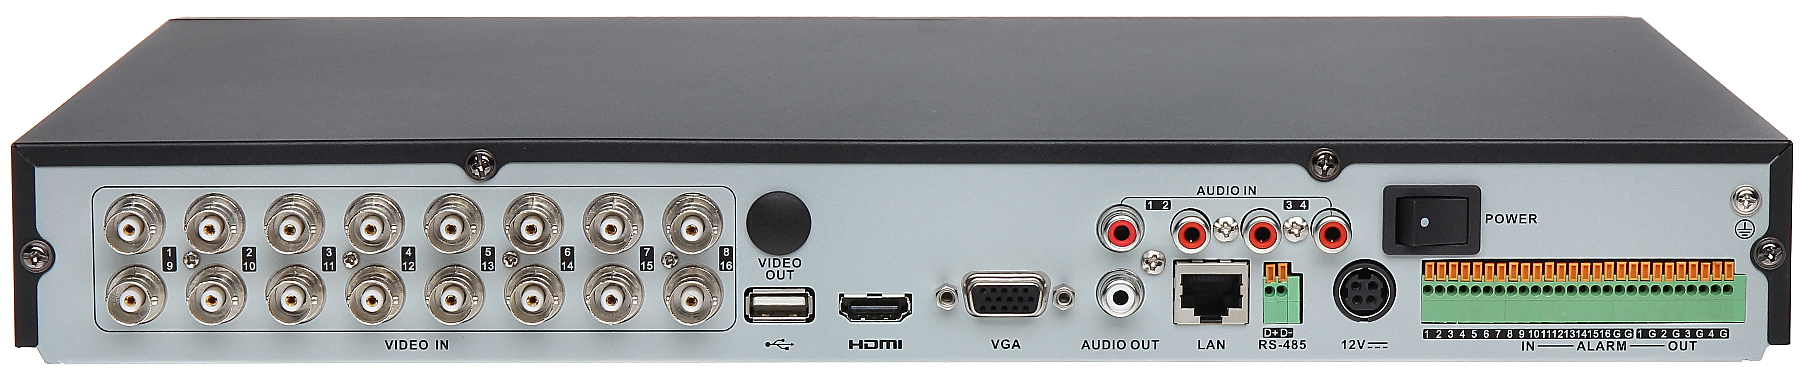 Hd Tvi Tcp Ip Pal Dvr Ds 7216hghi Sh A 16 Channels H 16 Channel And More Delta